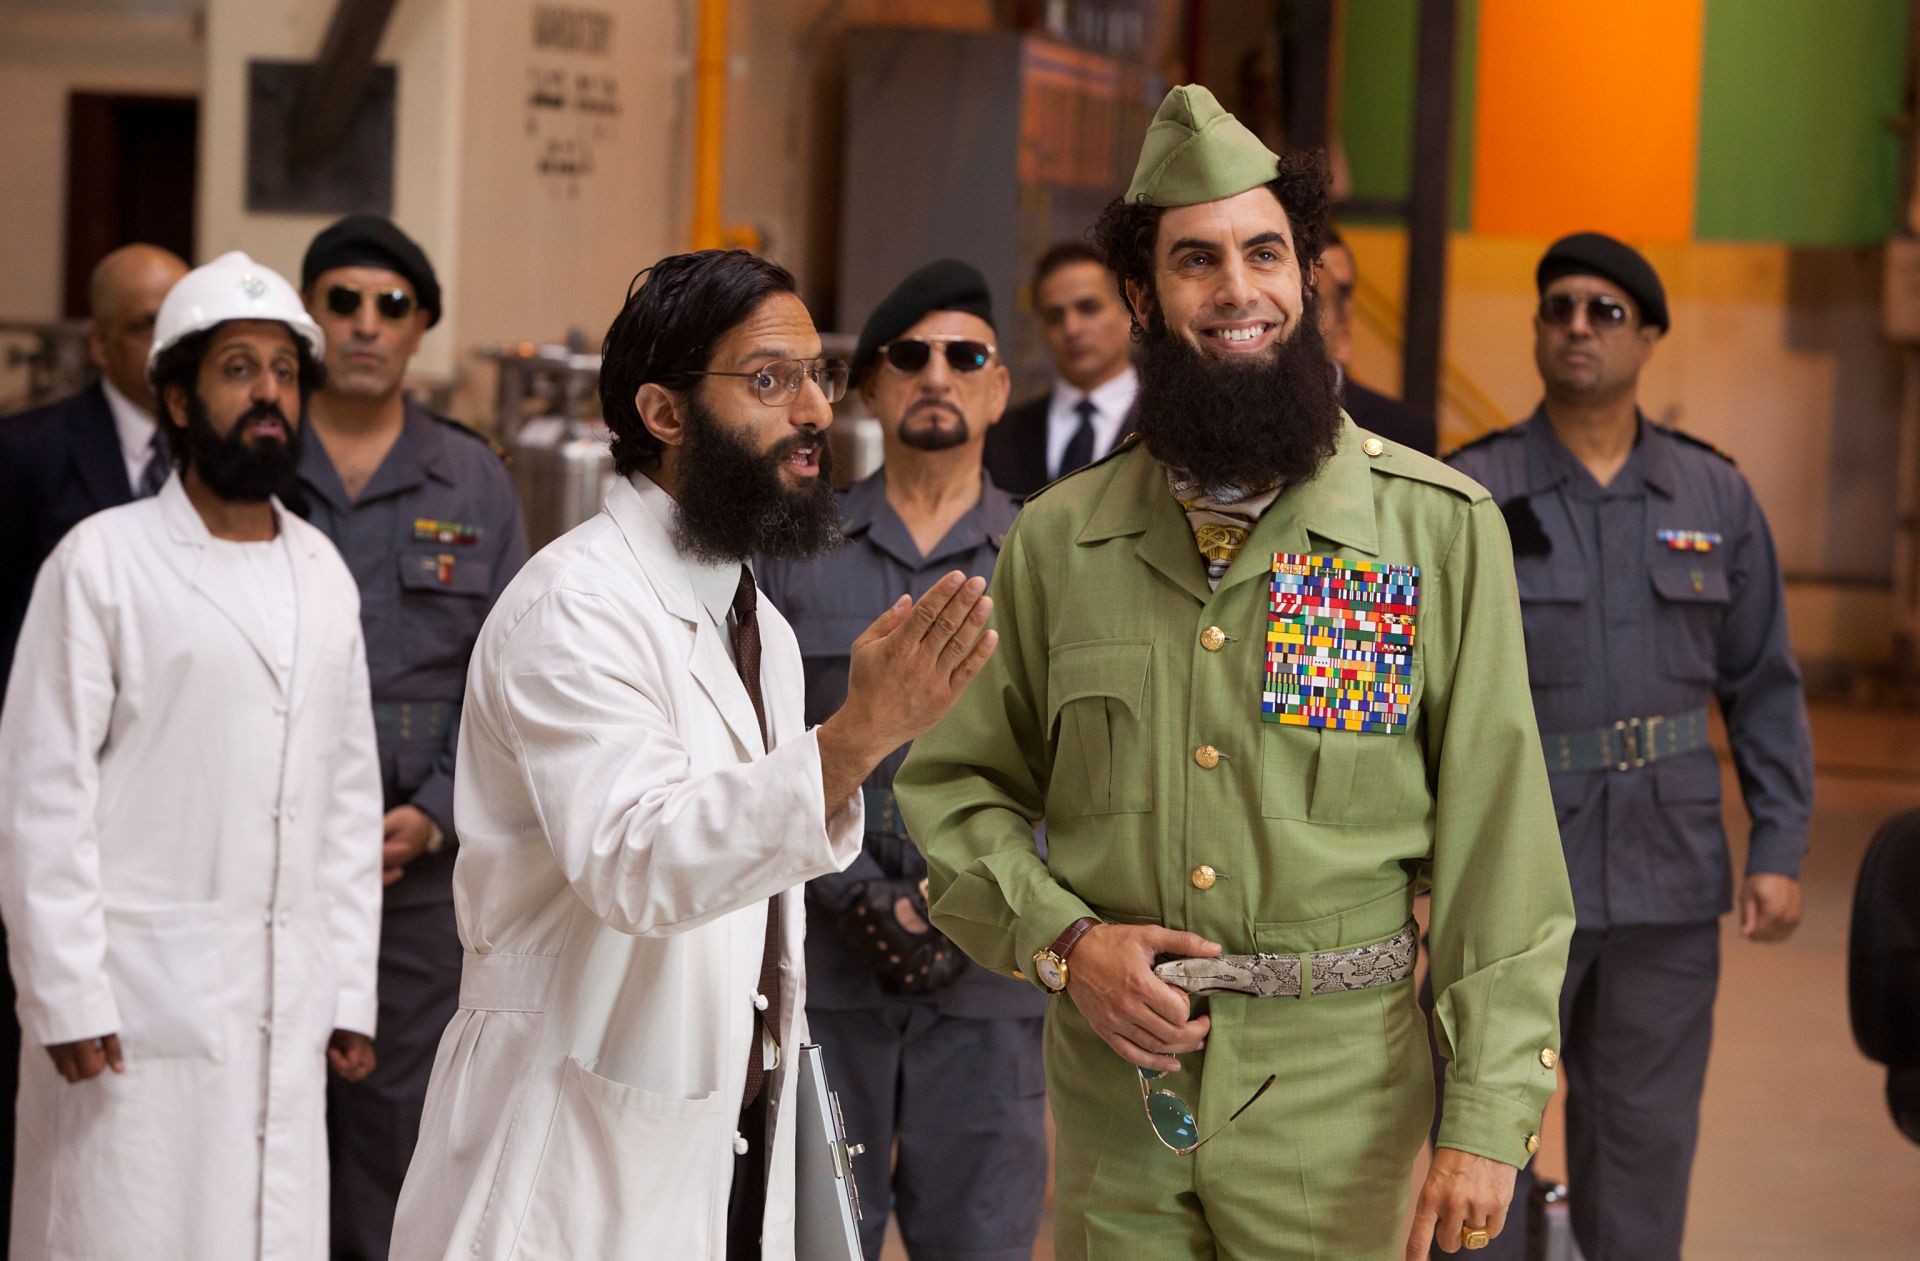 Adeel Akhtar, Jason Mantzoukas, Ben Kingsley and Sacha Baron Cohen in Paramount Pictures' The Dictator (2012). Photo credit by Melinda Sue Gordon.